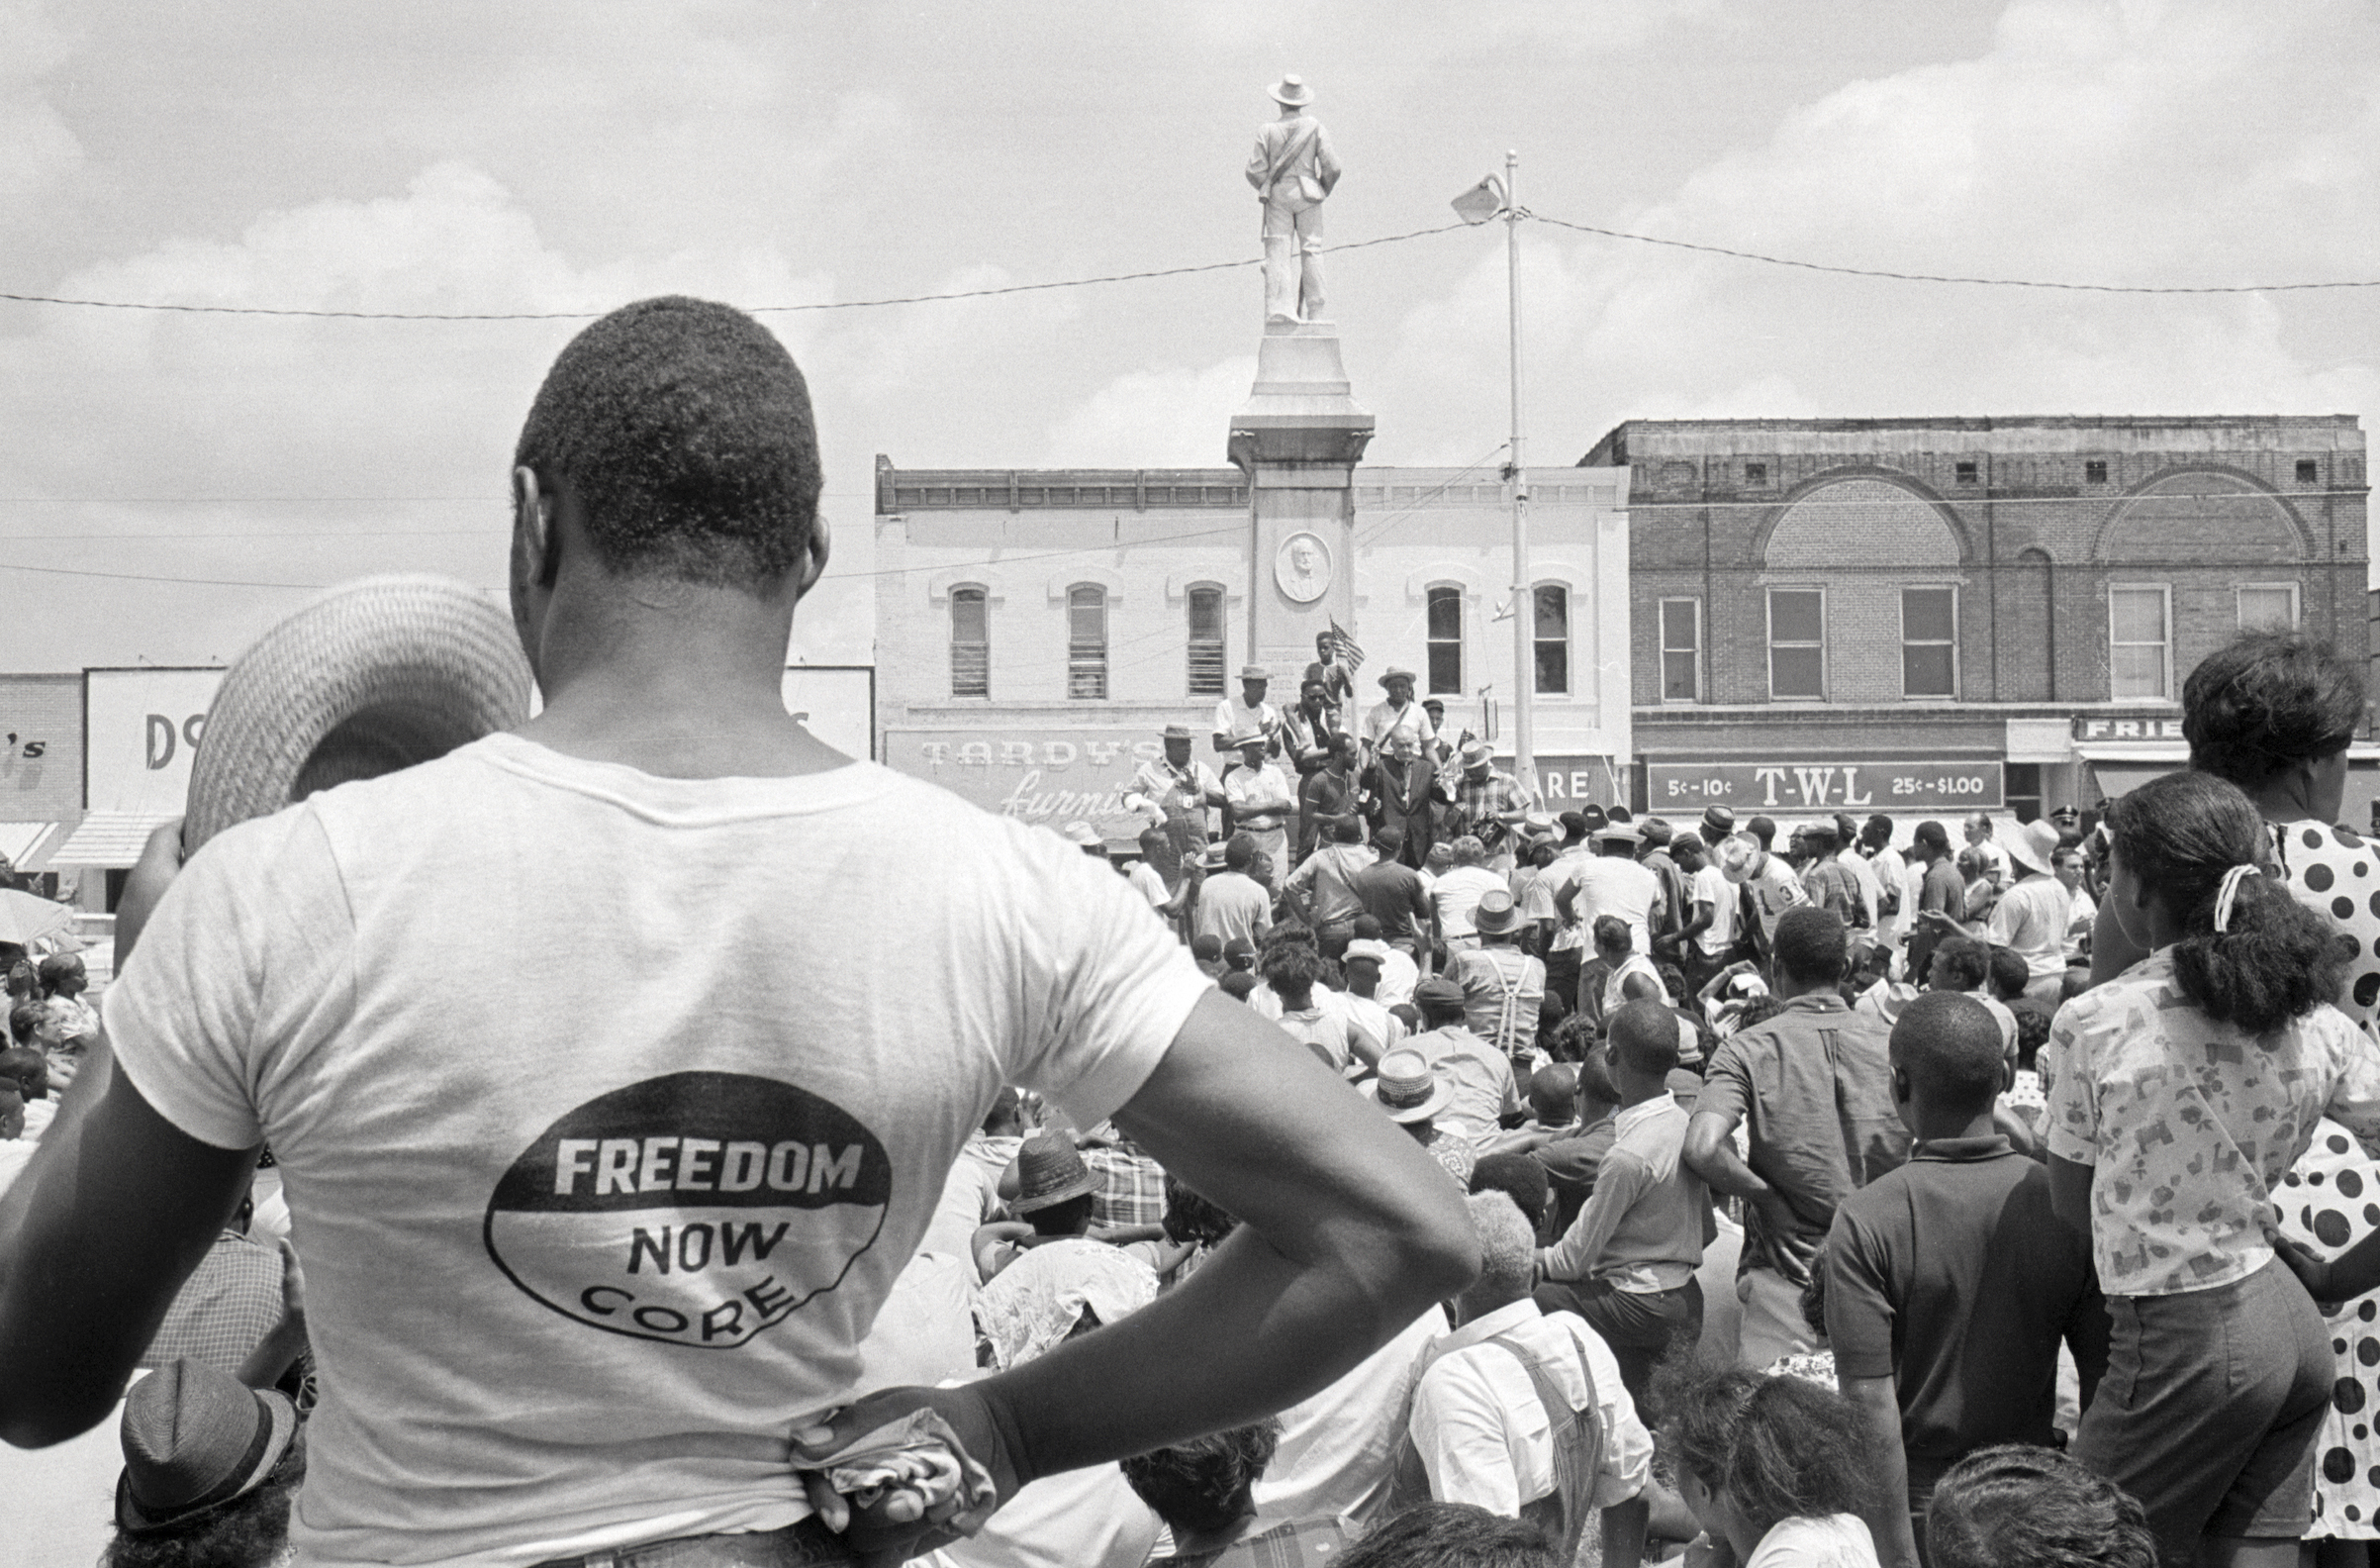 A marcher with "Freedom Now CORE" on his shirt joins in cheers of Mississippi Freedom march leaders assembled at the foot of a Civil War memorial statue in Grenada, Miss., in 1966. (Bettmann Archive/Getty Images)